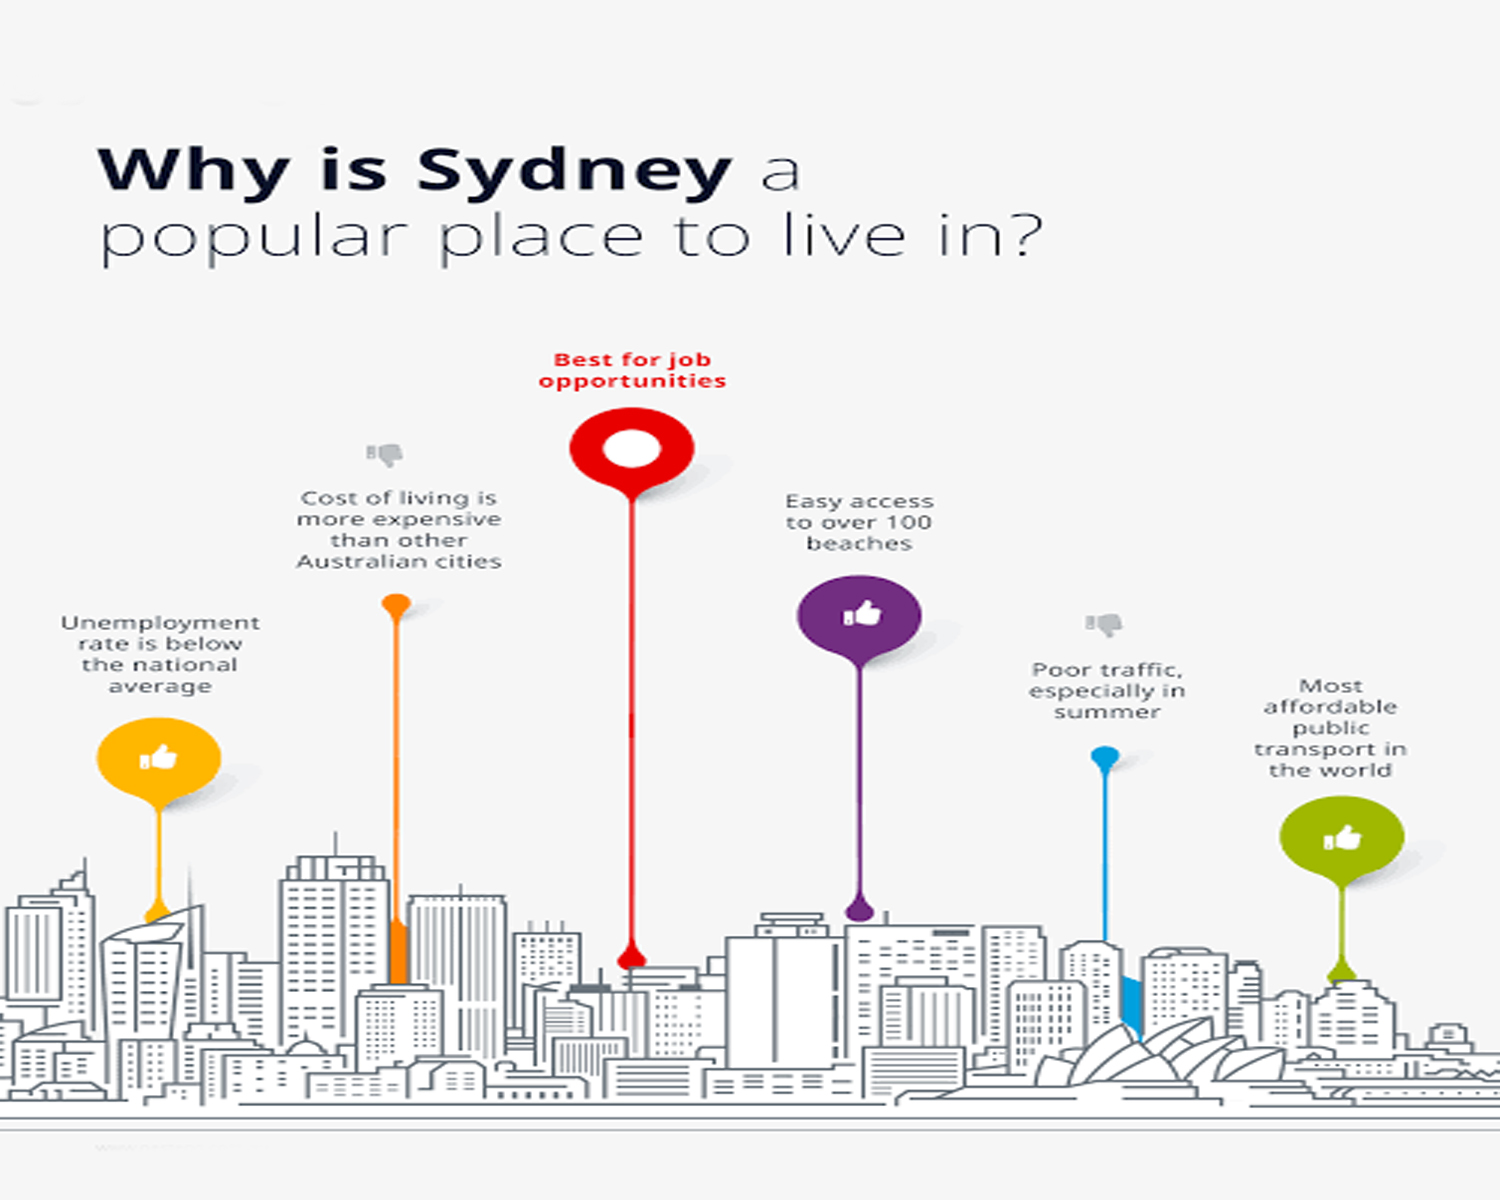 Sydney a popular place to live in